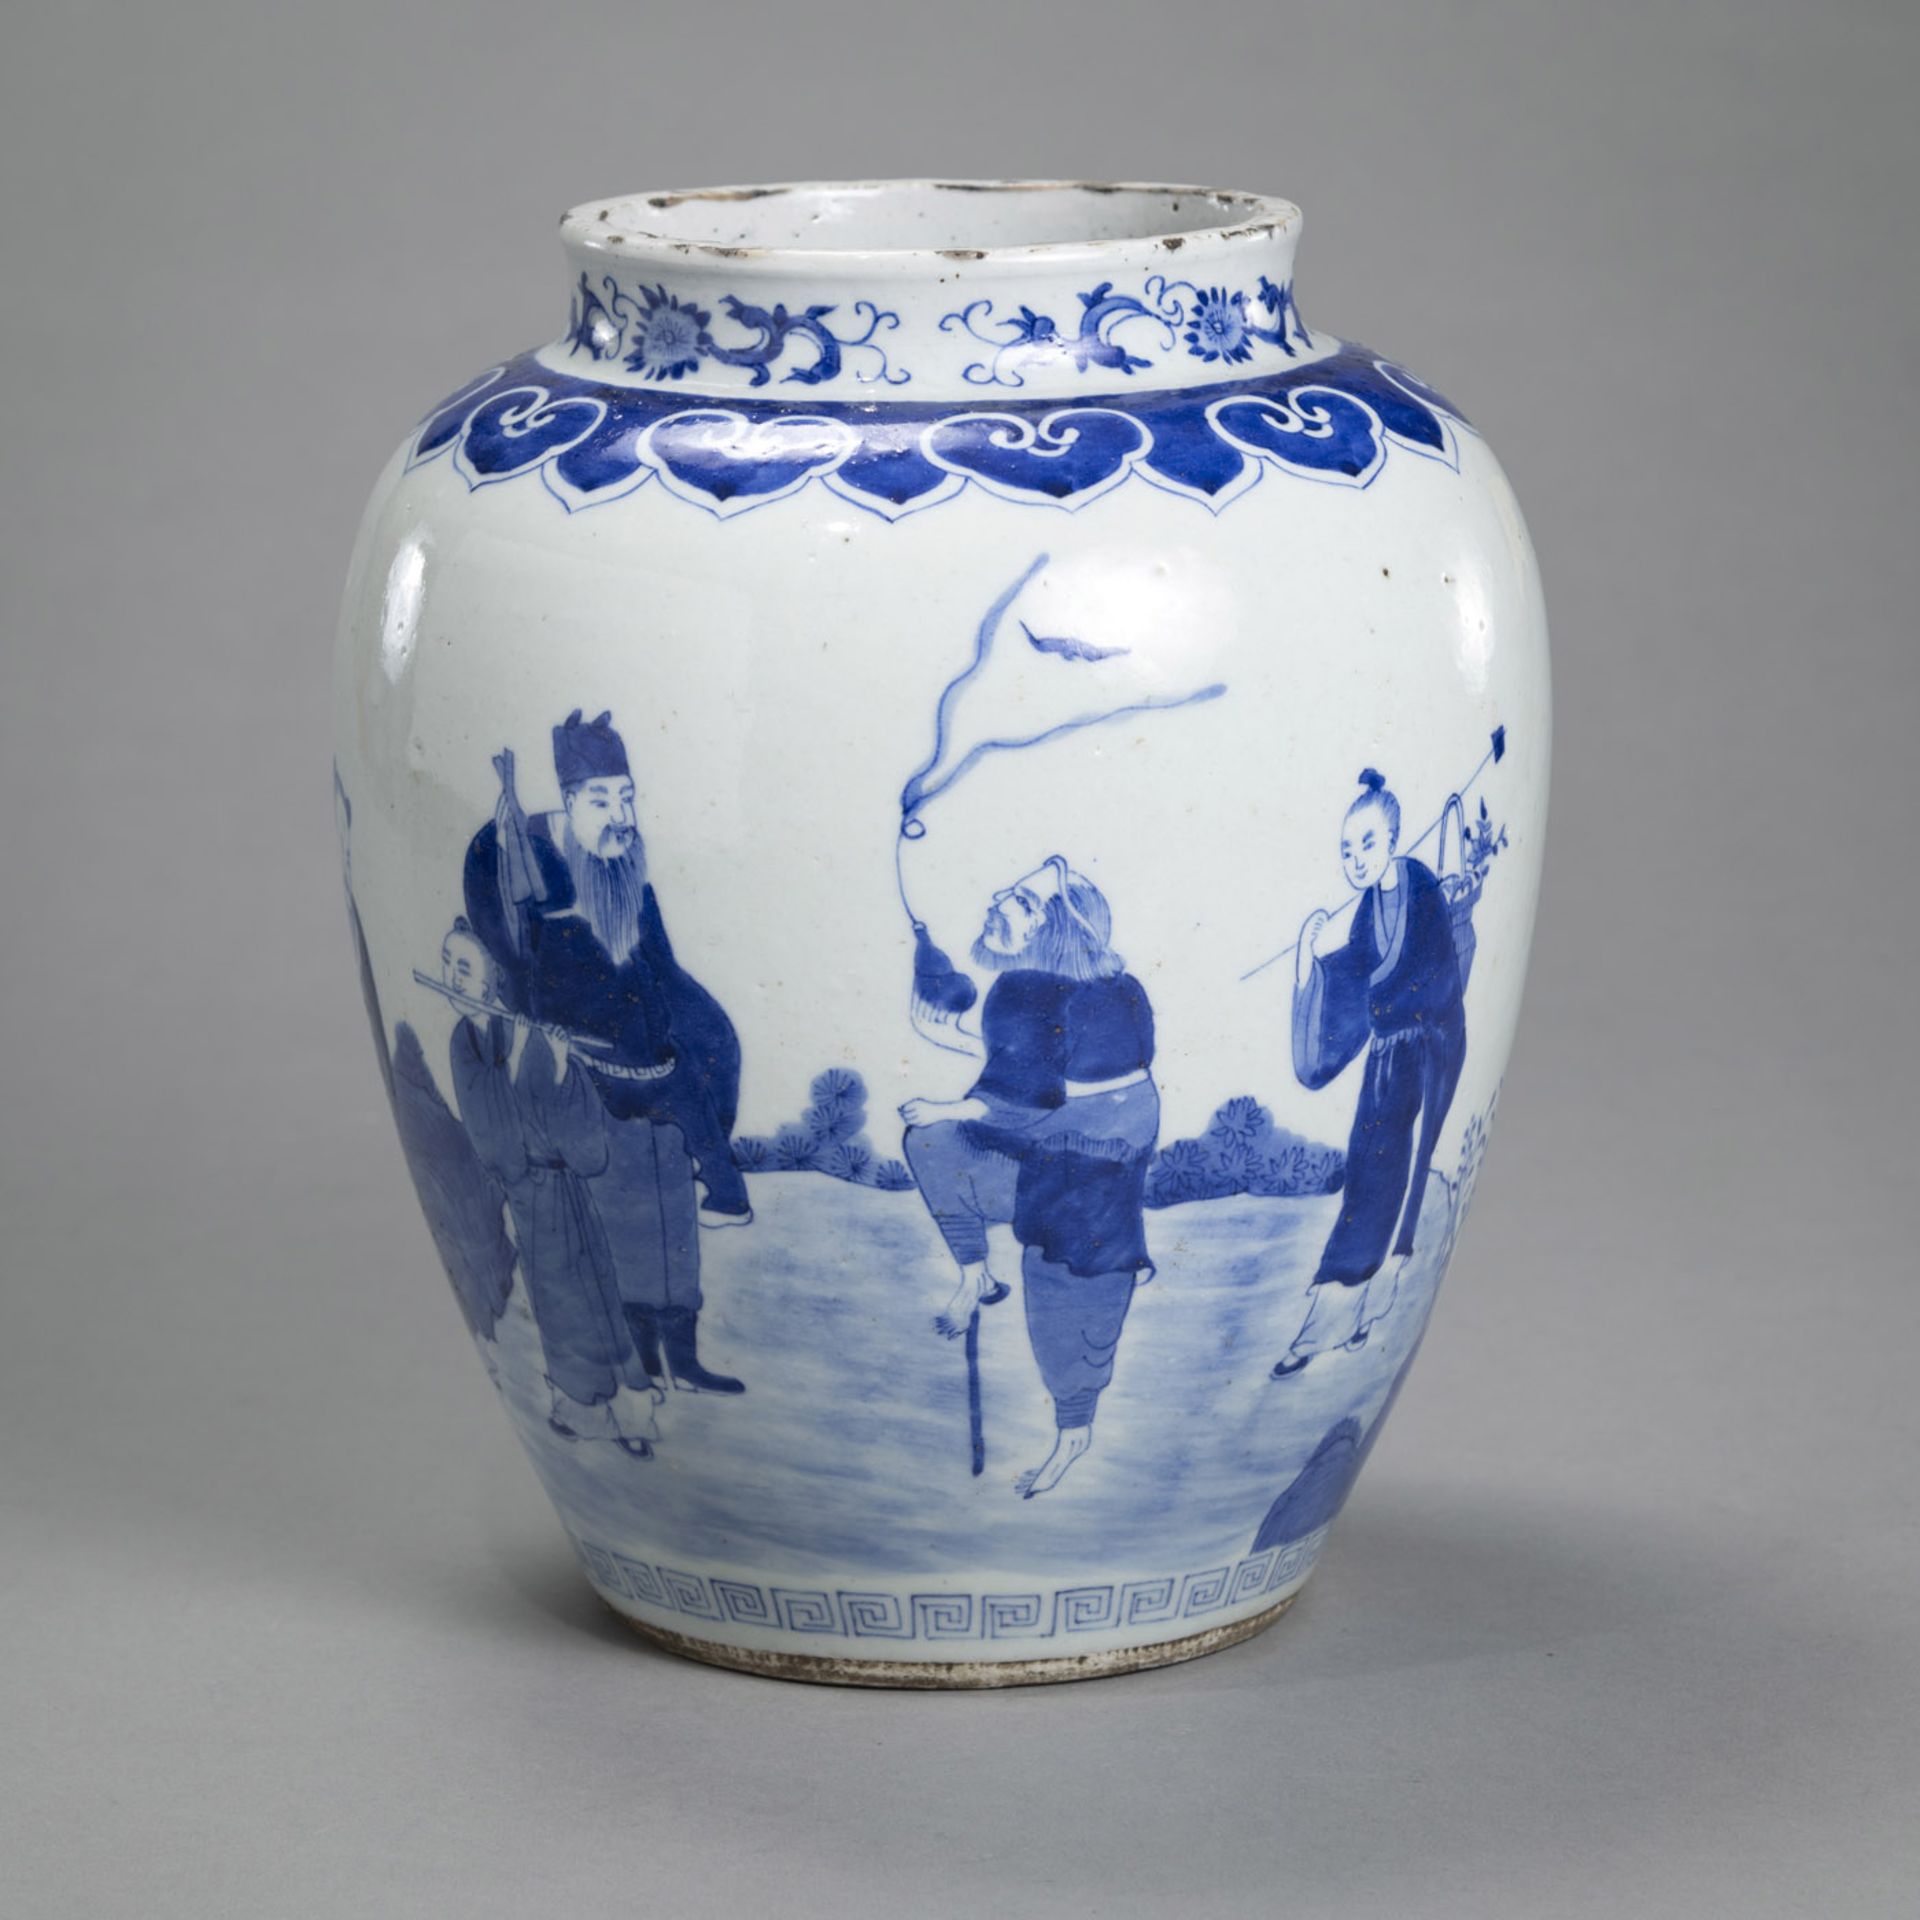 A PORCELAIN JAR WITH UNDERGLAZE BLUE DECORATION OF THE EIGHT IMMORTALS